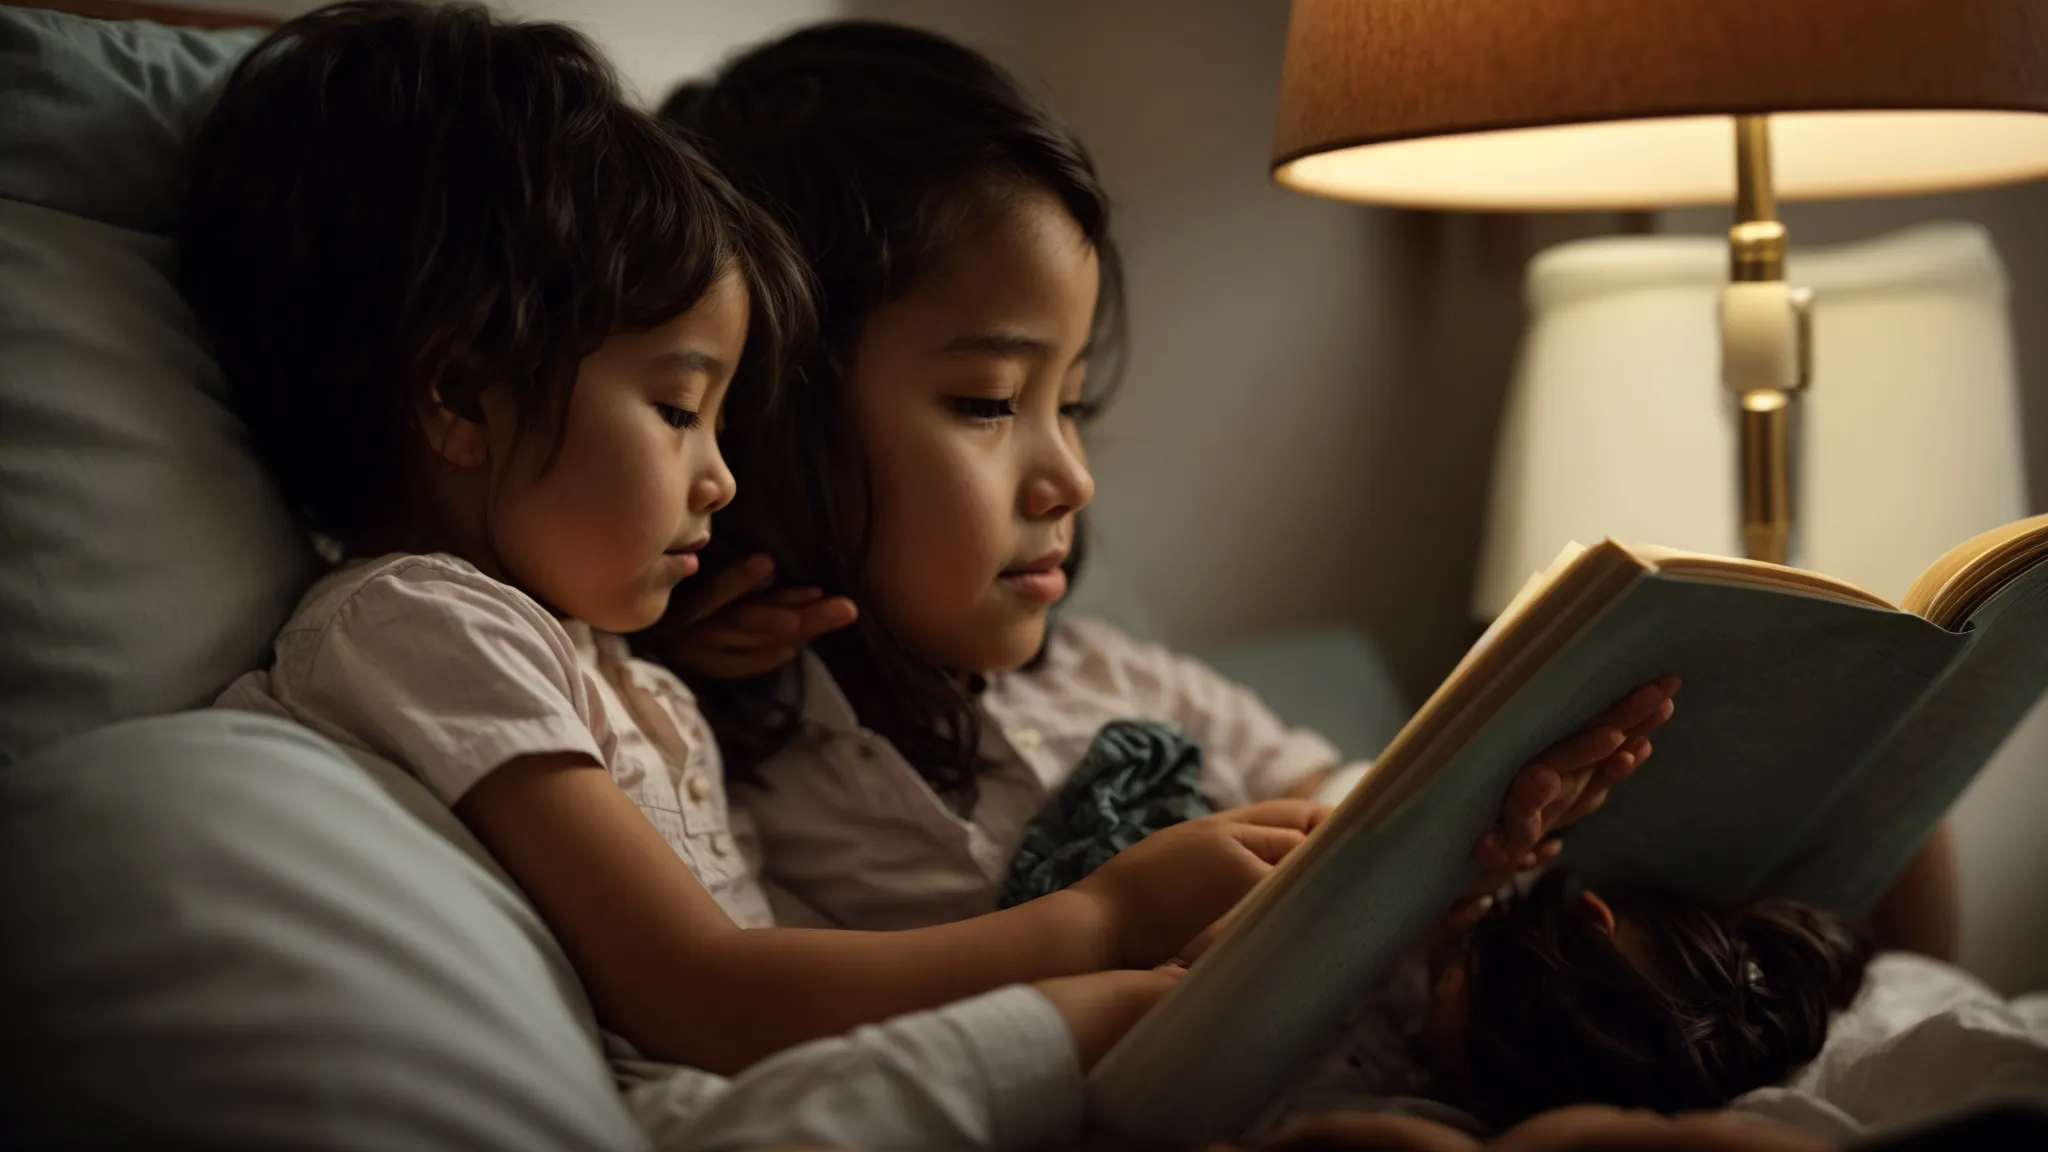 a parent and child sit together, absorbed in a book under the soft light of a reading lamp.